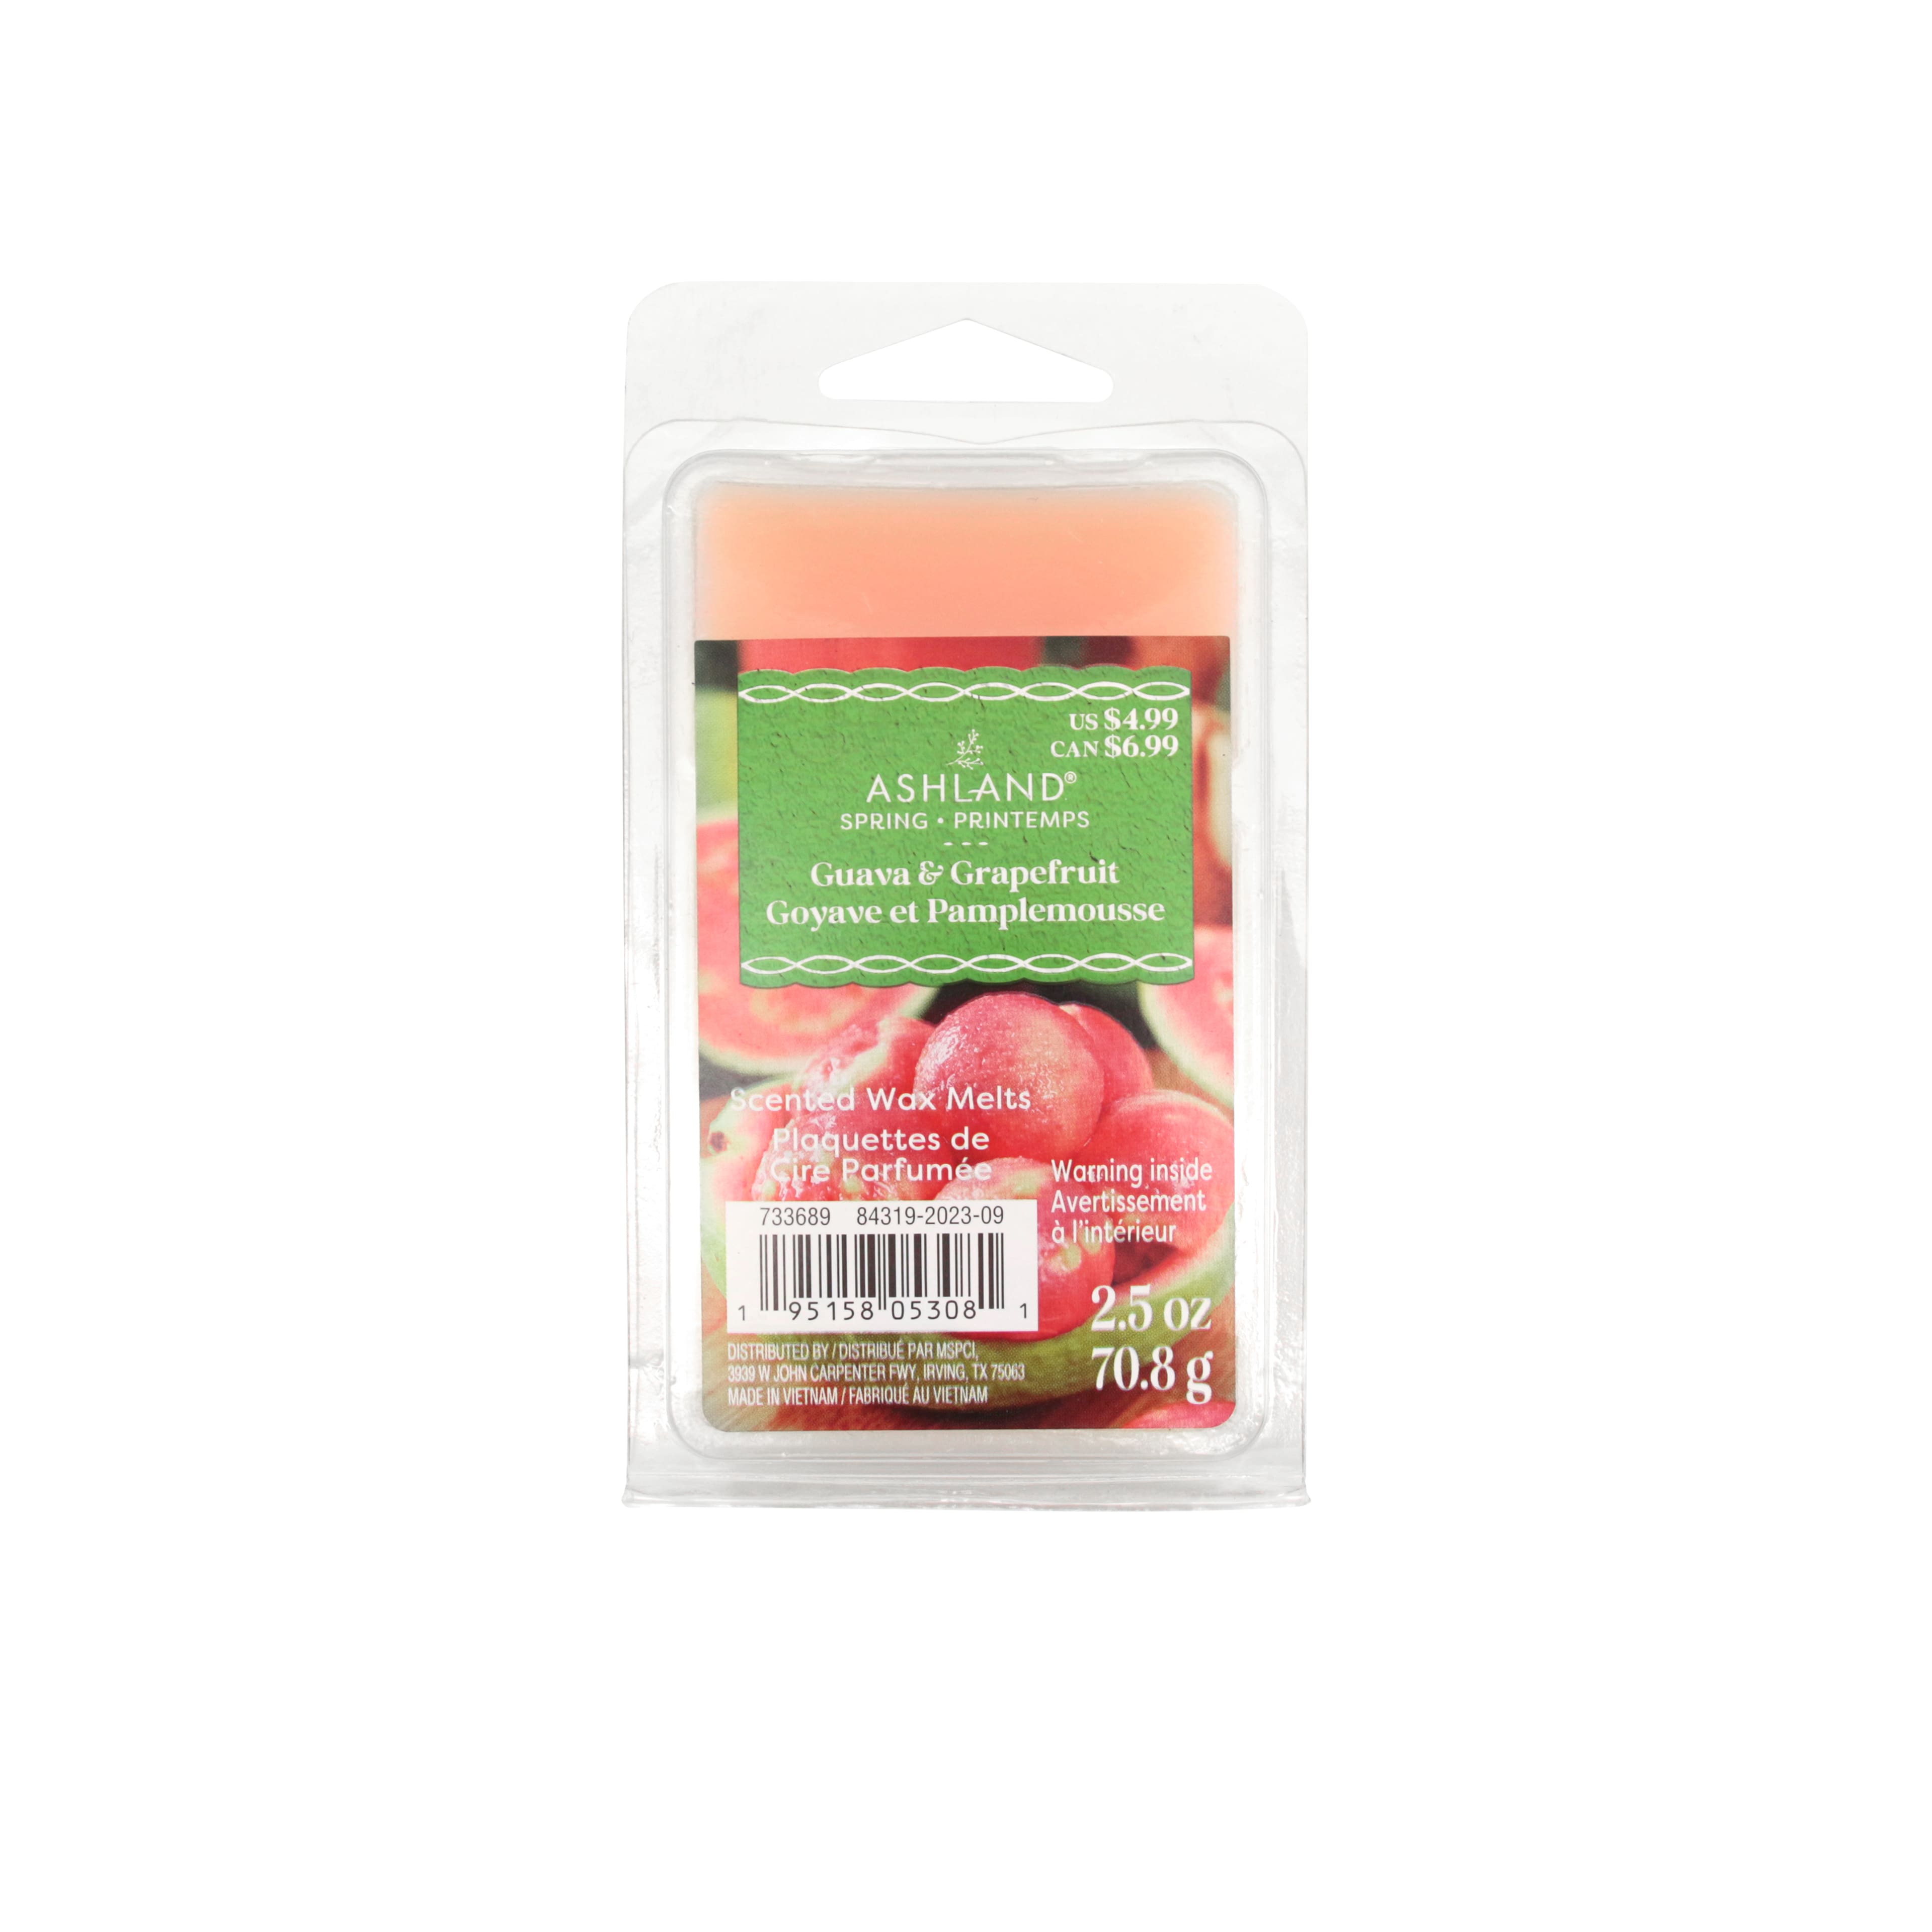 Guava &#x26; Grapefruit Scented Wax Melts by Ashland&#xAE;